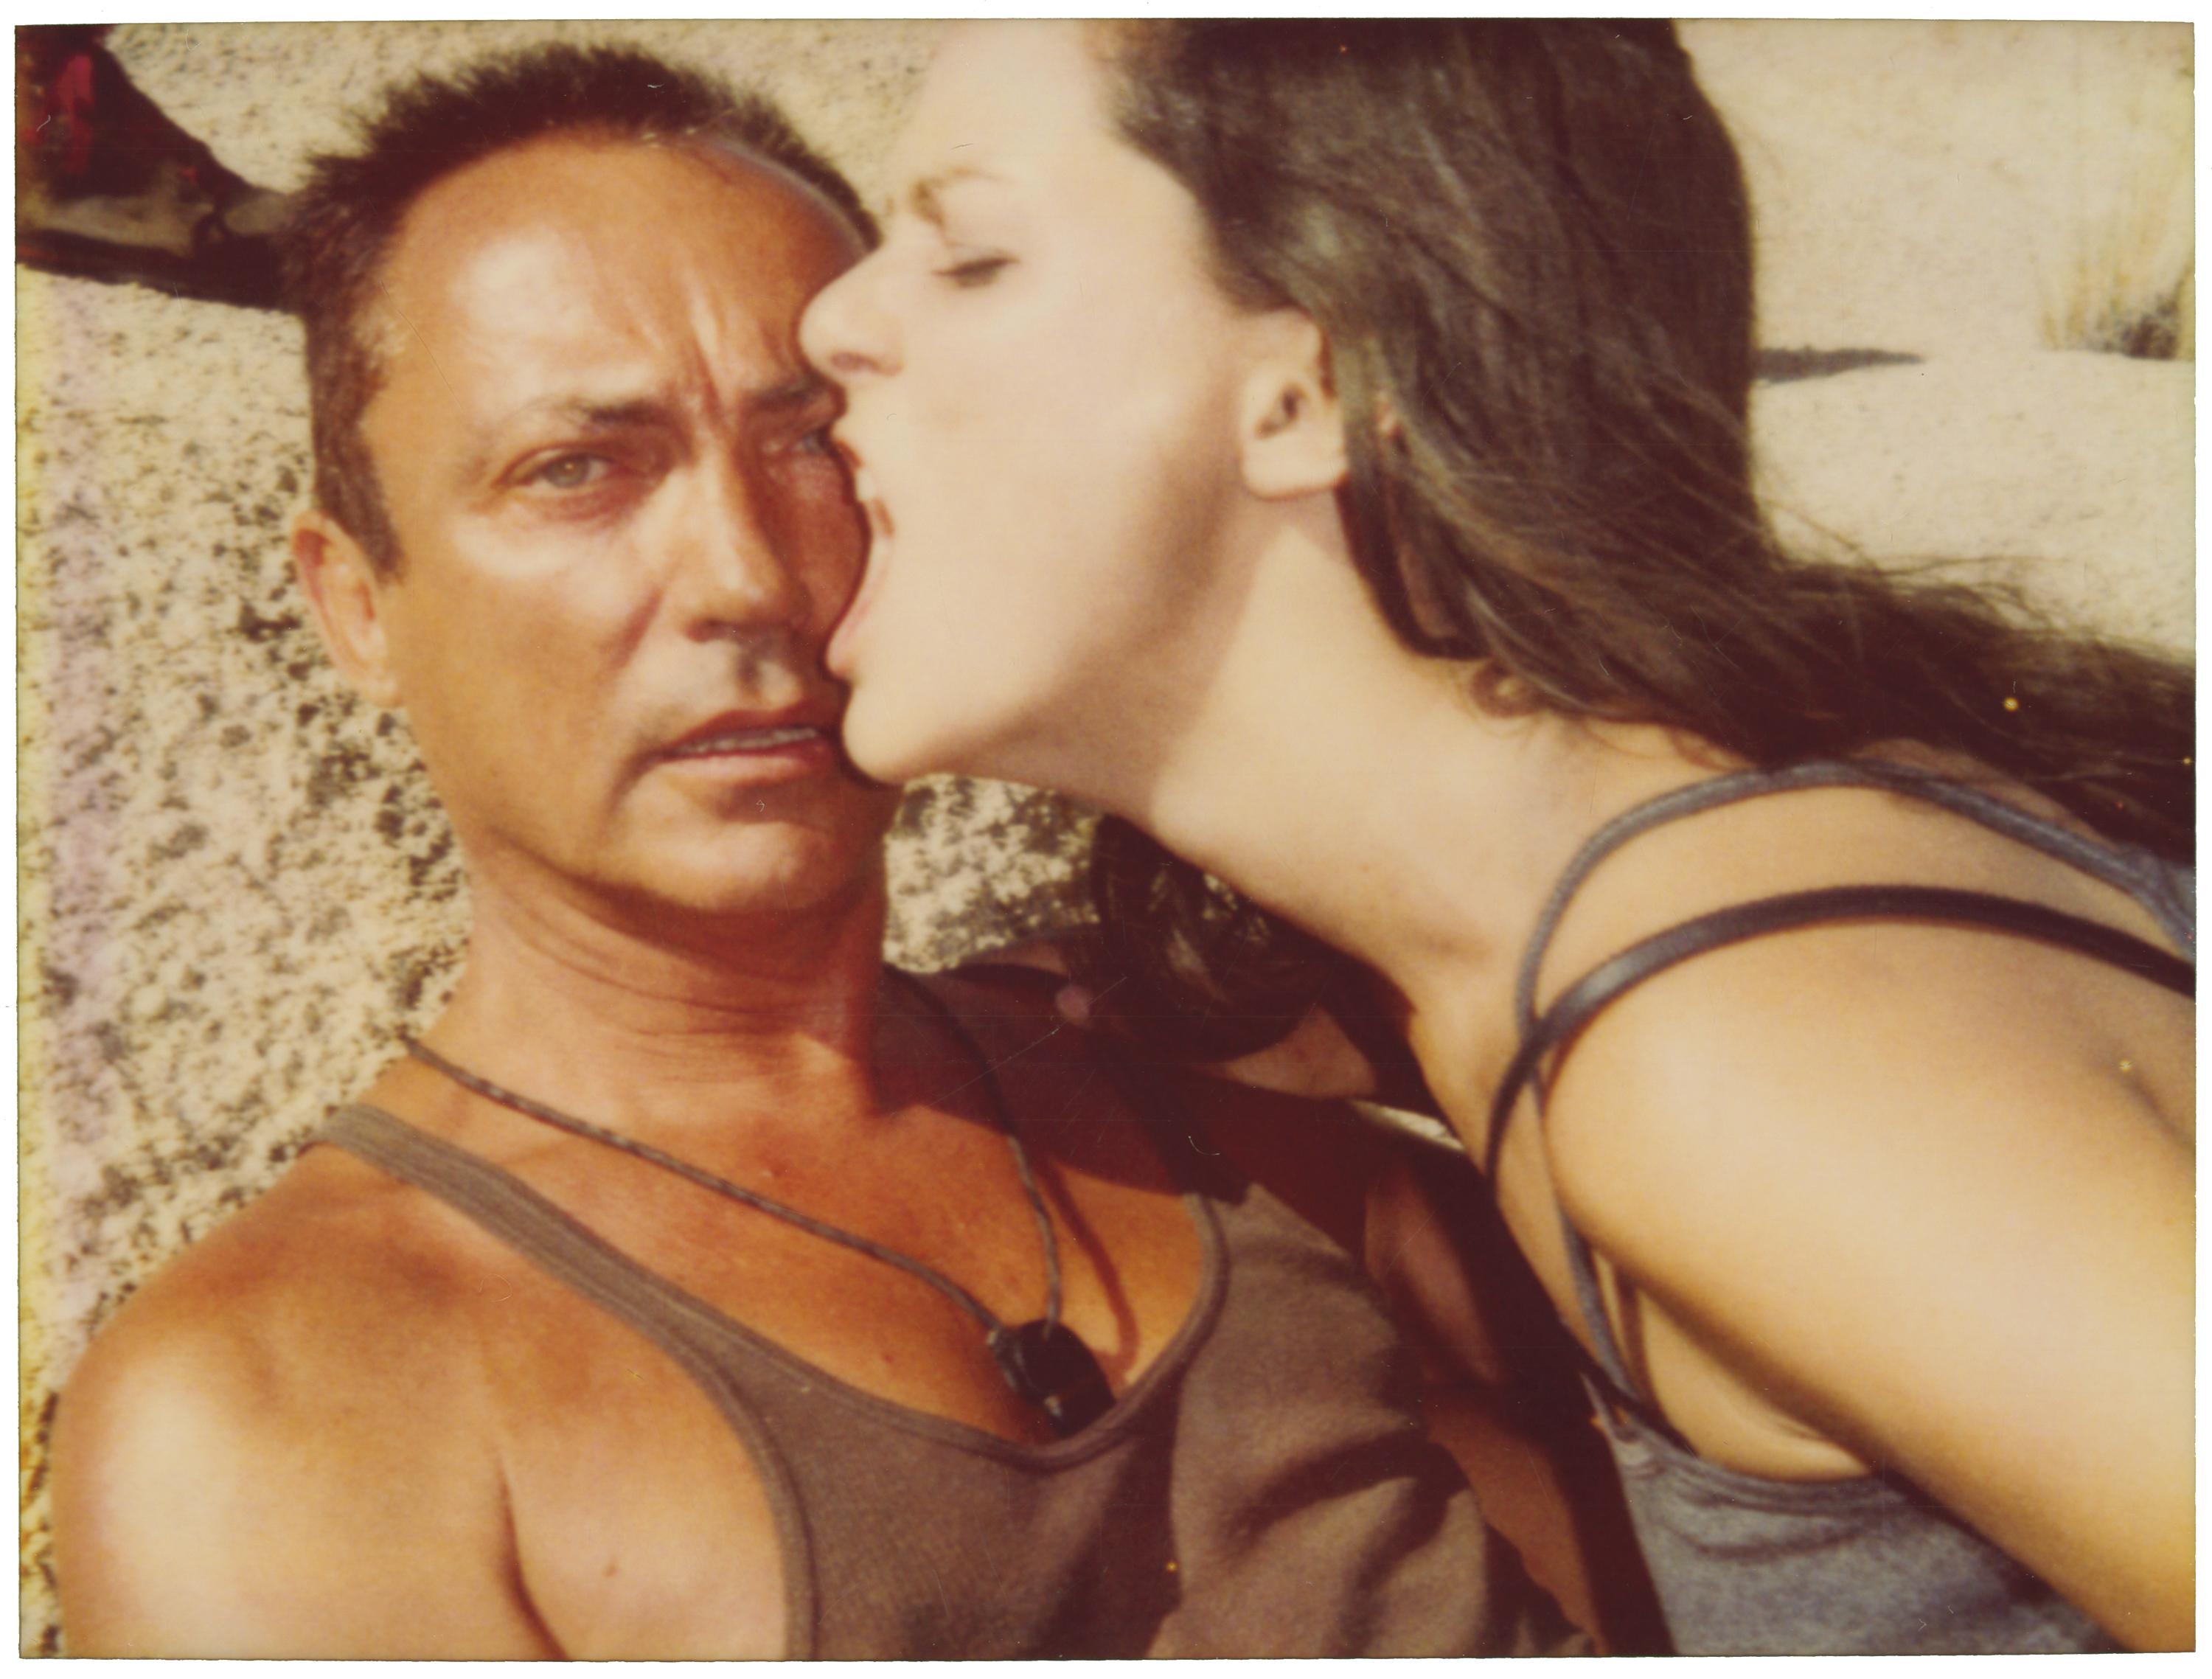 Stefanie Schneider Portrait Photograph - 'Hans and Penelope' from the movie Immaculate Springs - starring Udo Kier